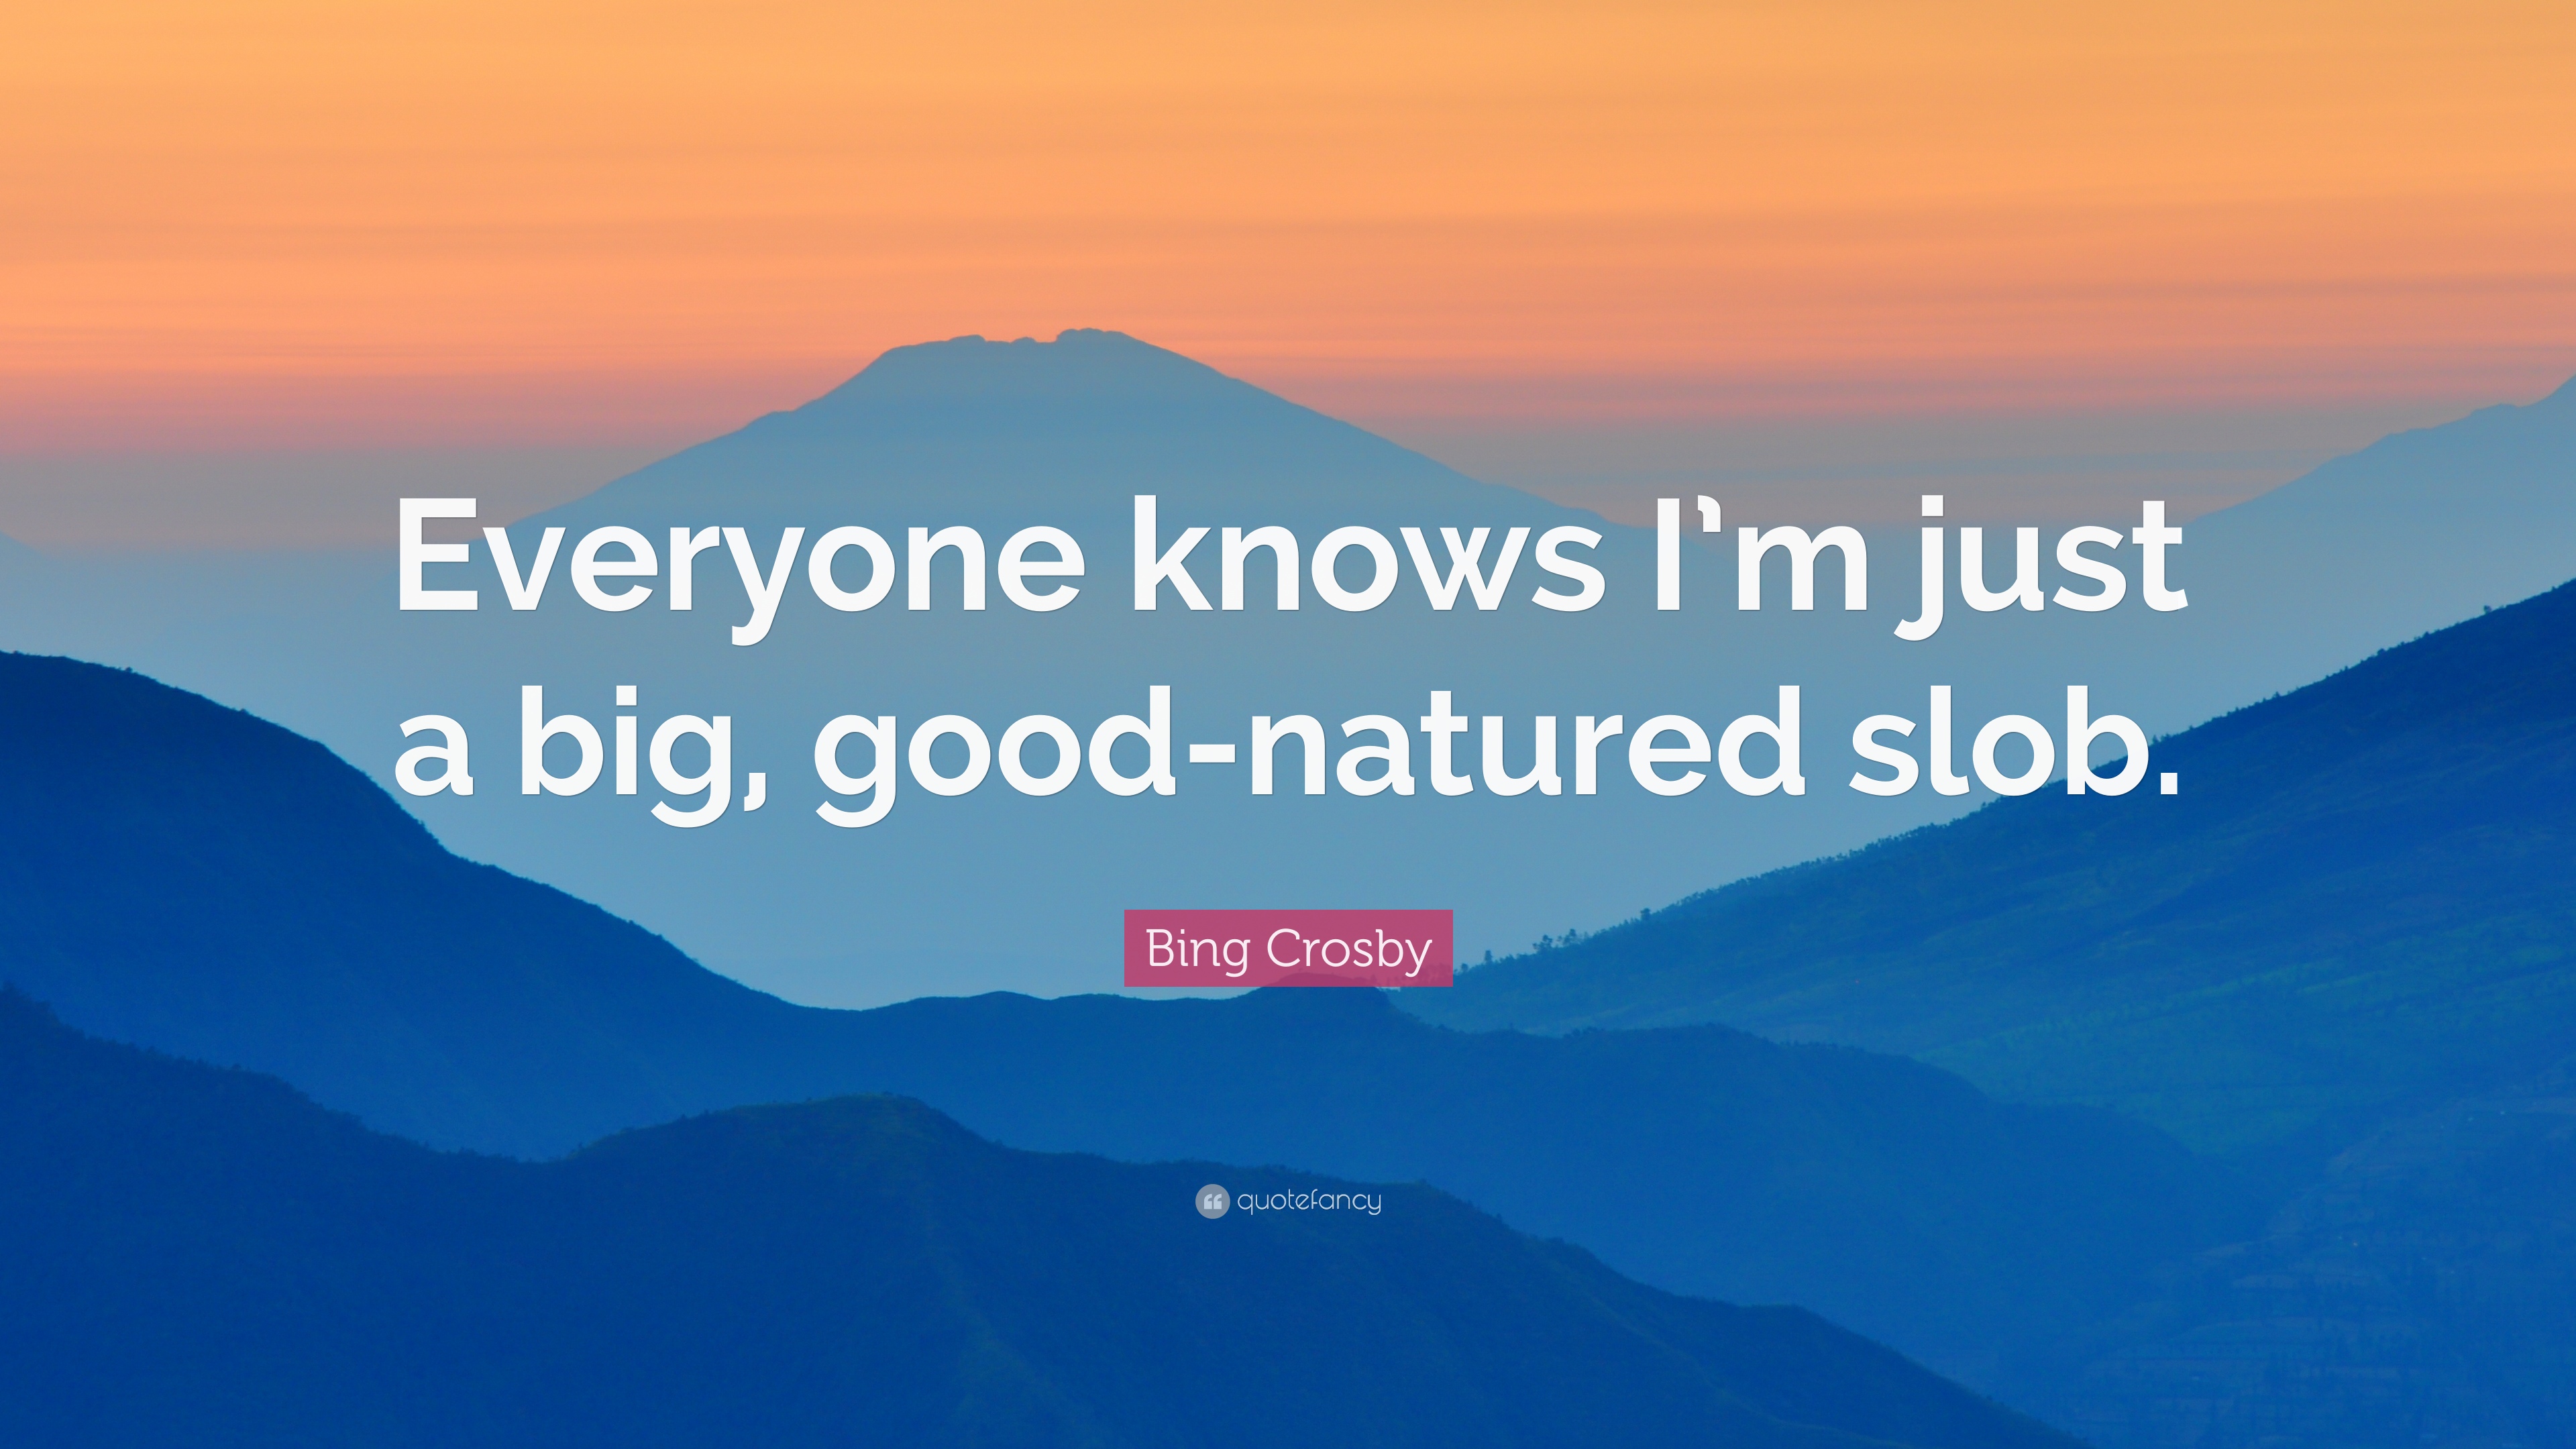 Bing Crosby Quote: “Everyone Knows I'm Just A Big, Good Natured Slob